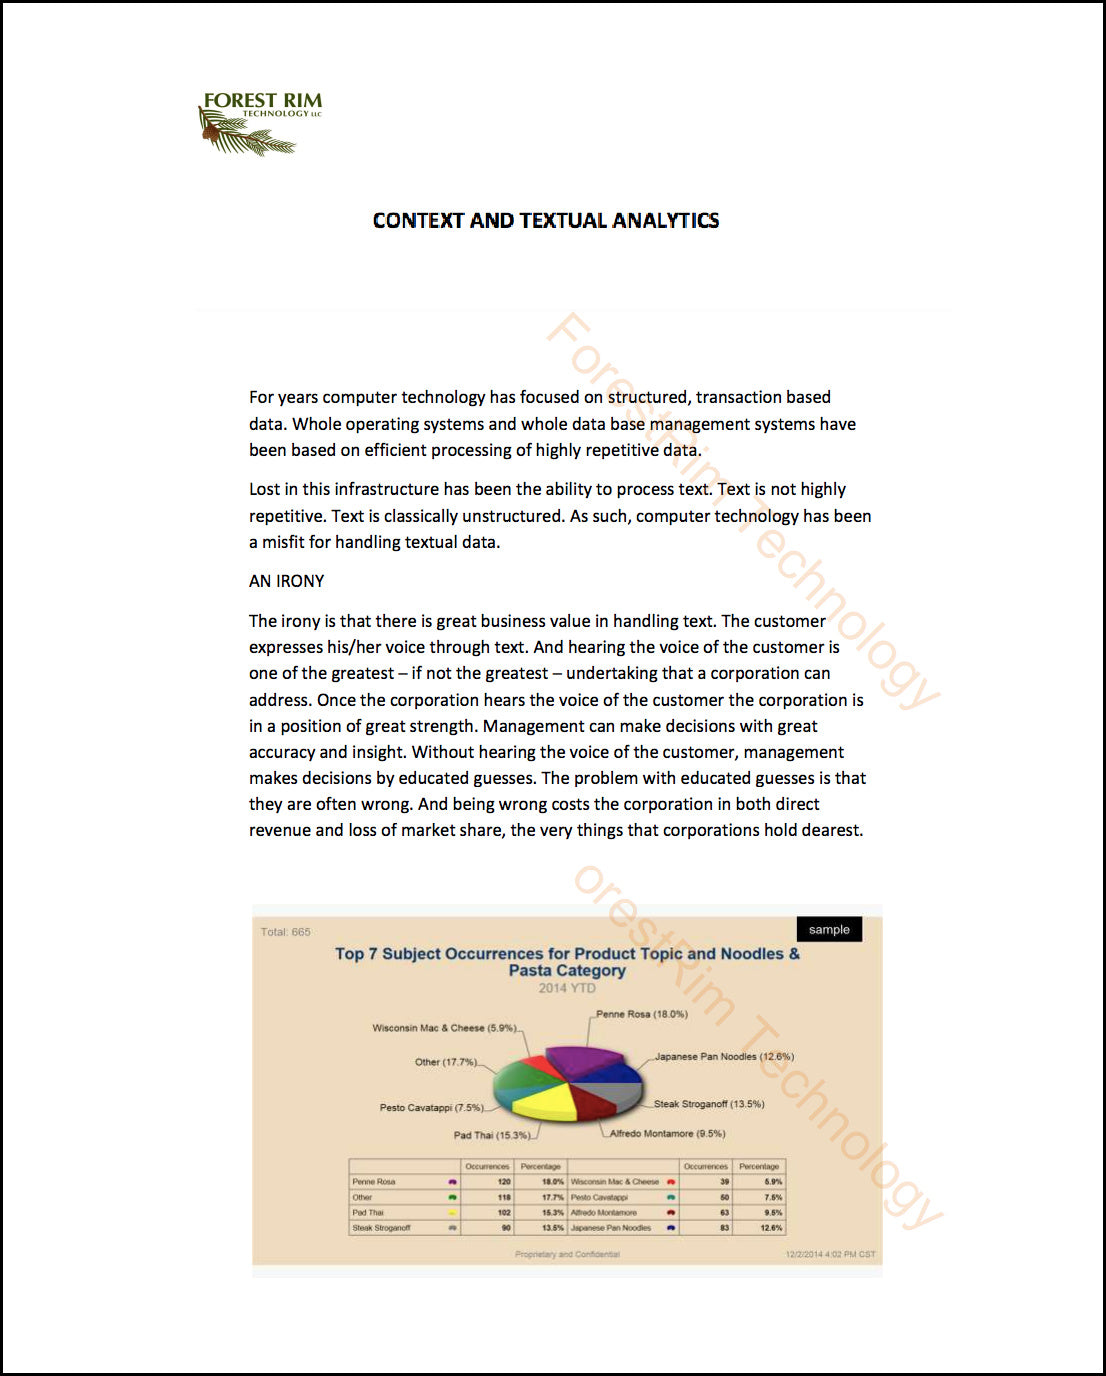 CONTEXT AND TEXTUAL ANALYTICS